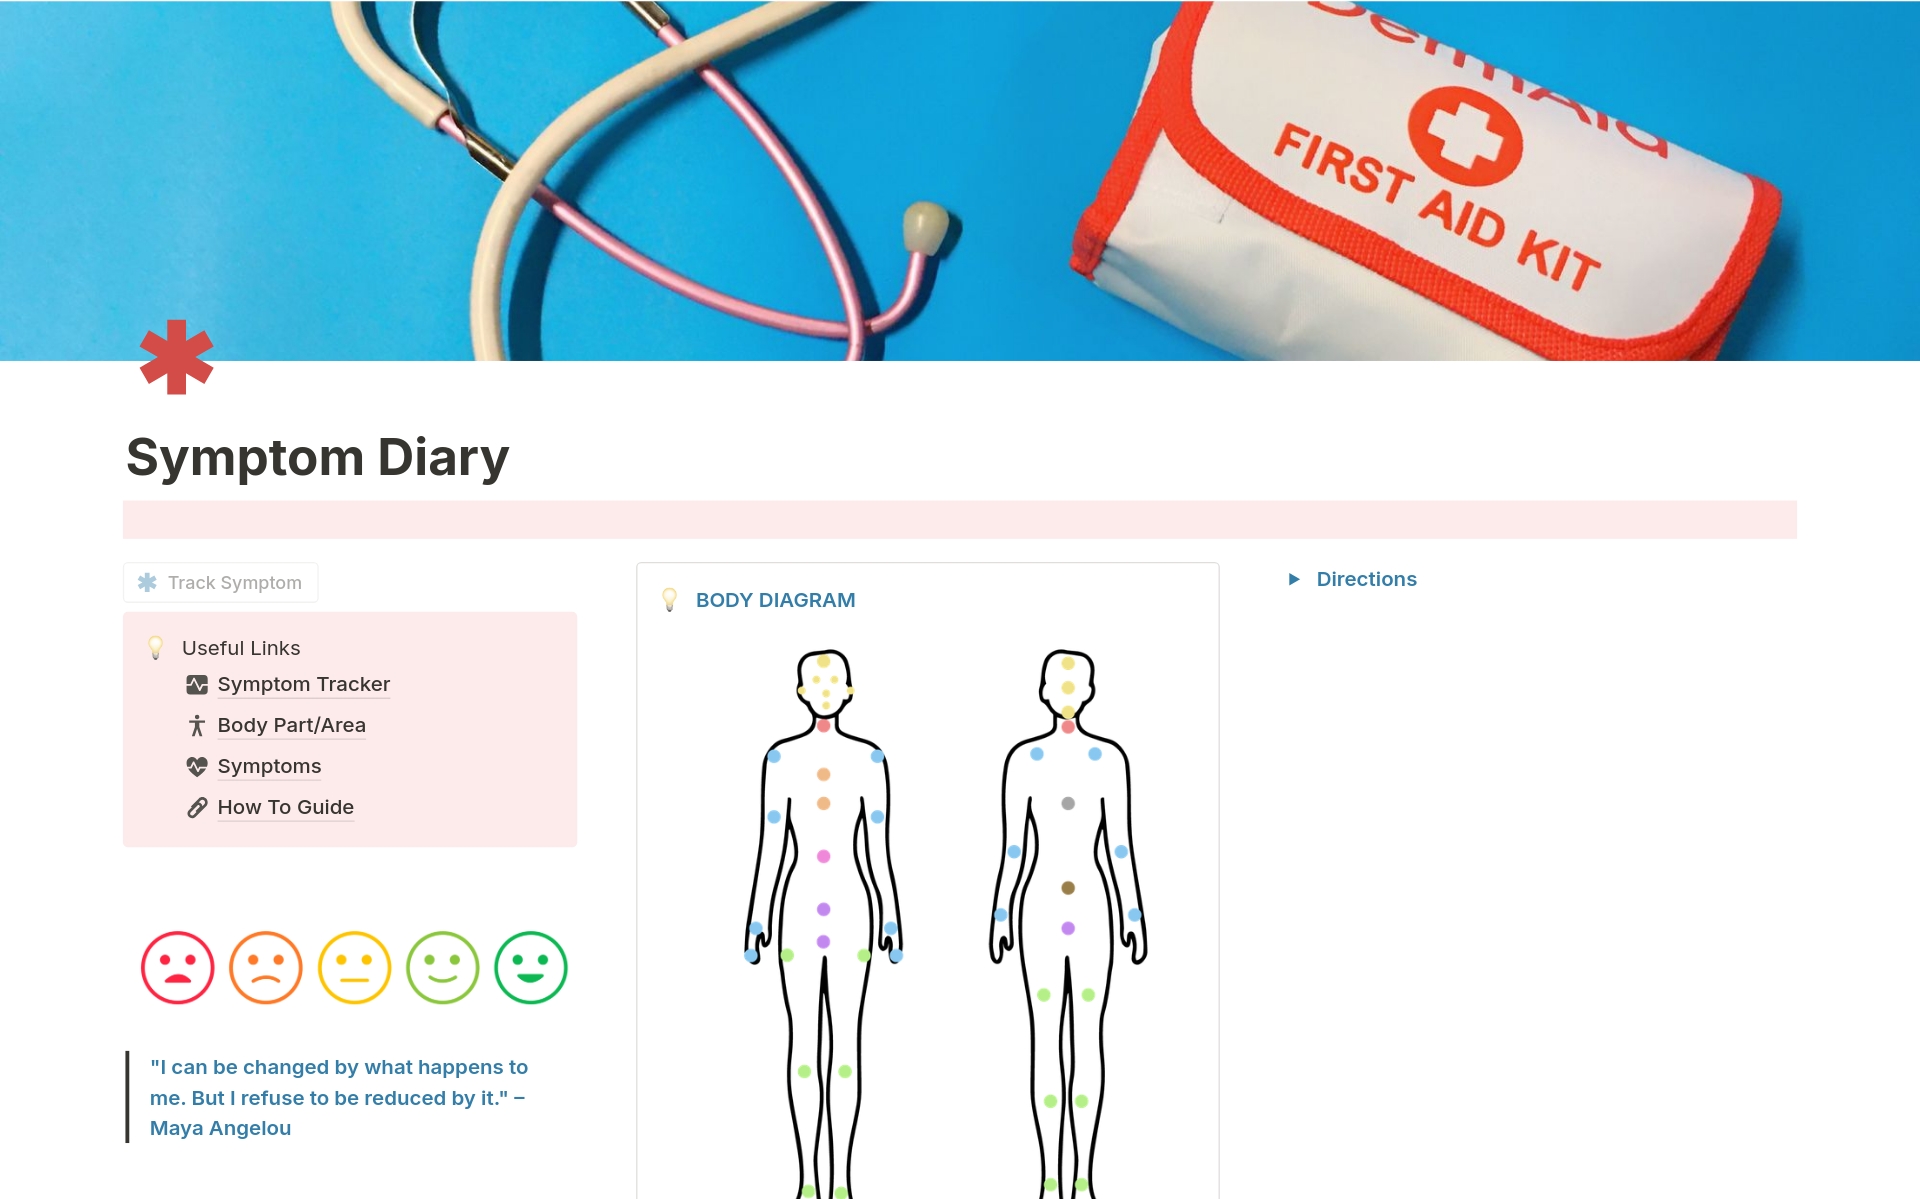 Symptom Diary, the Notion template is an organized and user-friendly tool for tracking health symptoms, featuring options for detailing over 50 symptoms, severity scales, note sections, and an intuitive interface for easy data analysis and sharing with healthcare professionals.